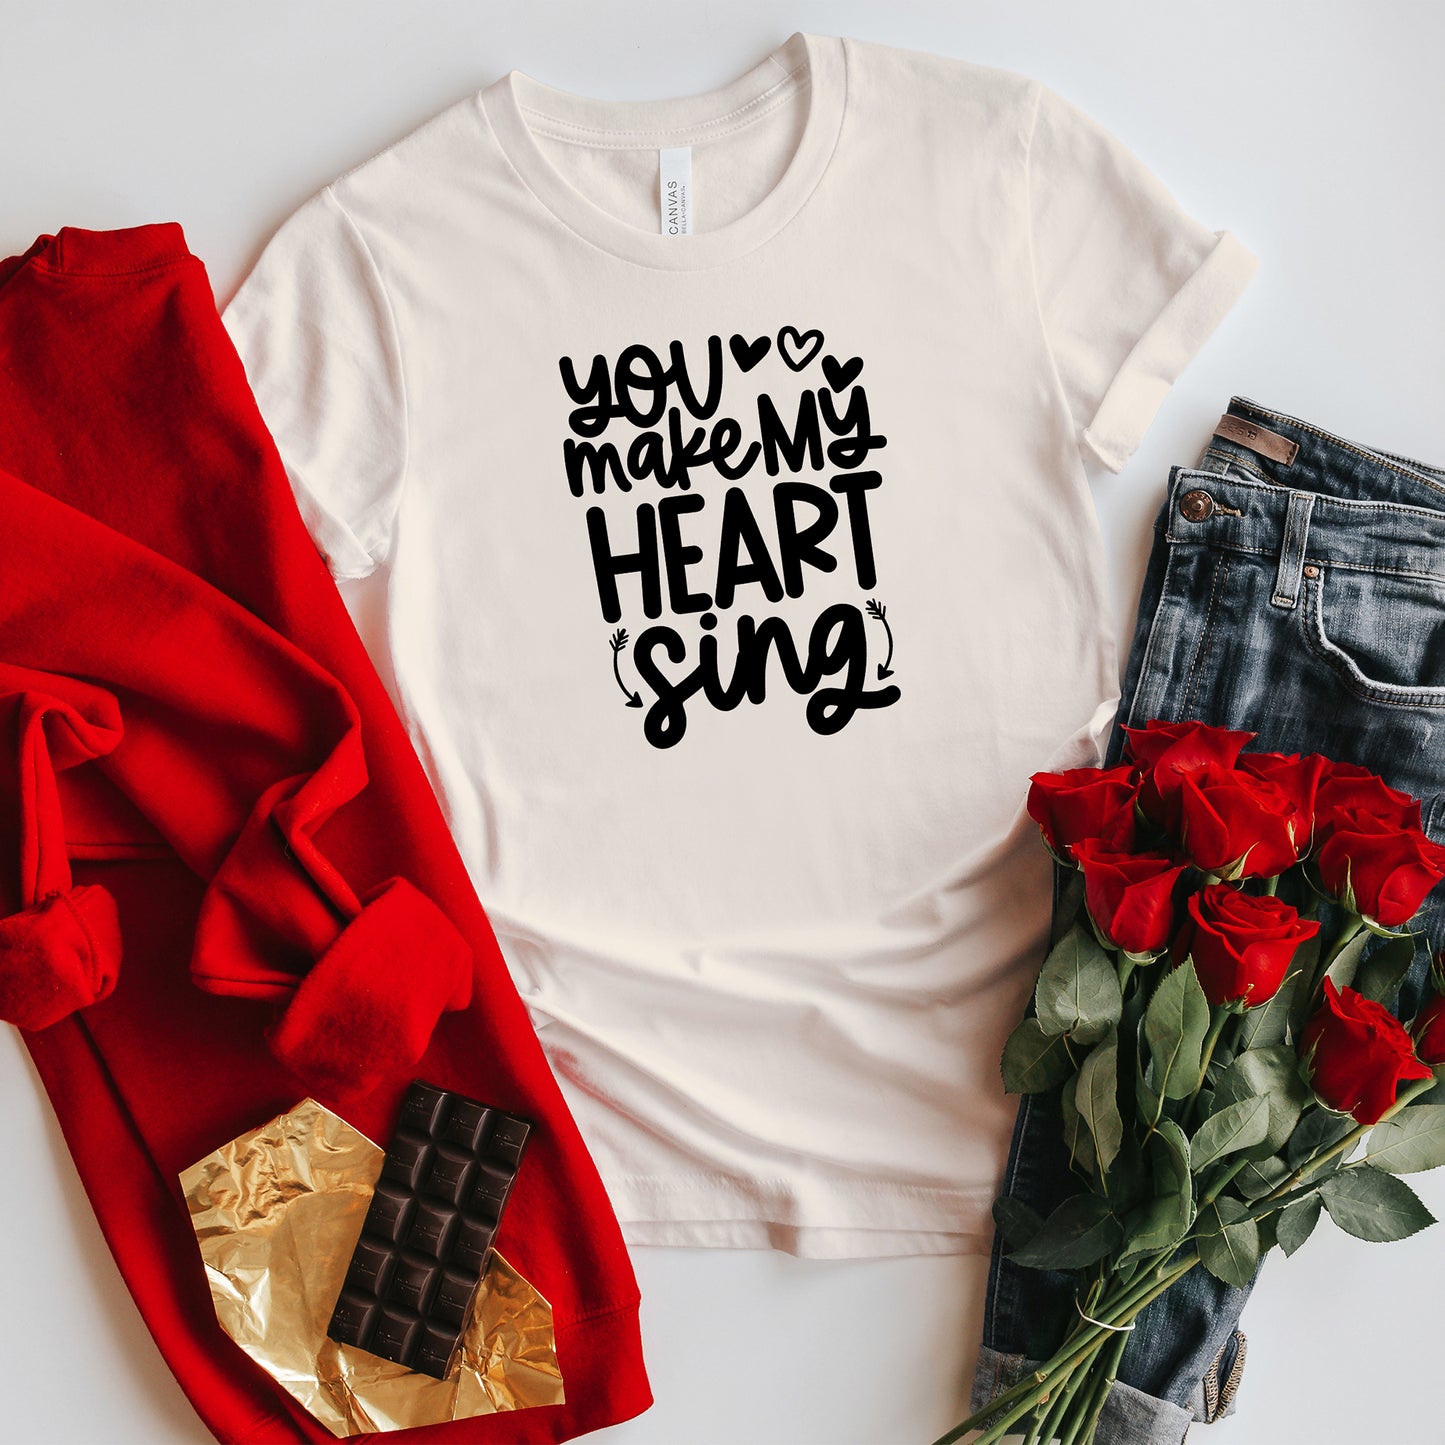 You Make My Heart Sing Hearts | Short Sleeve Graphic Tee